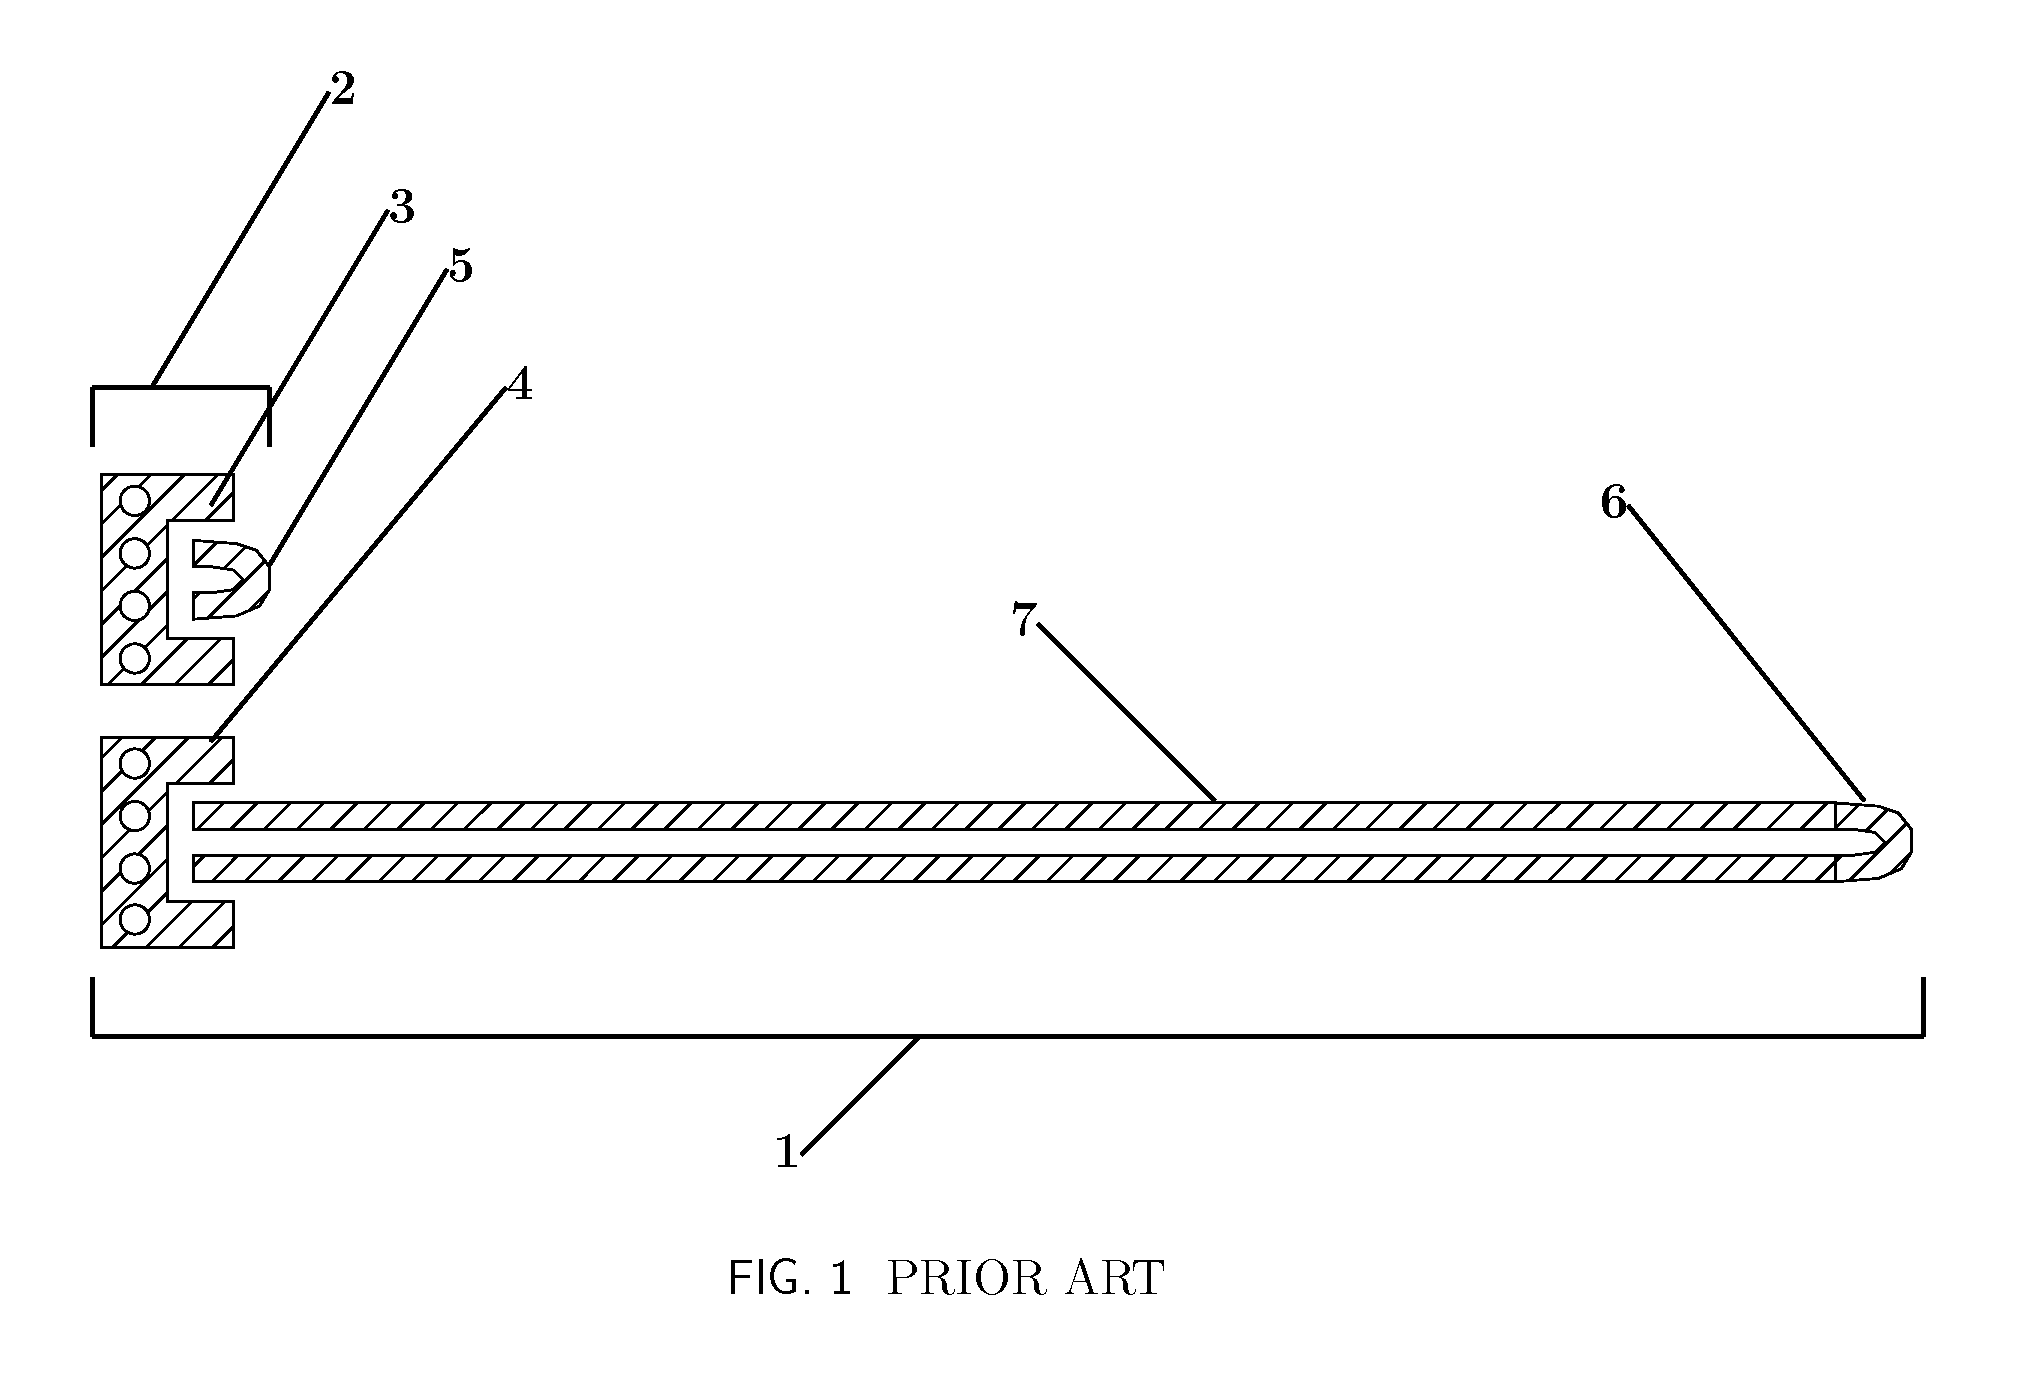 Method for printed circuit board trace characterization